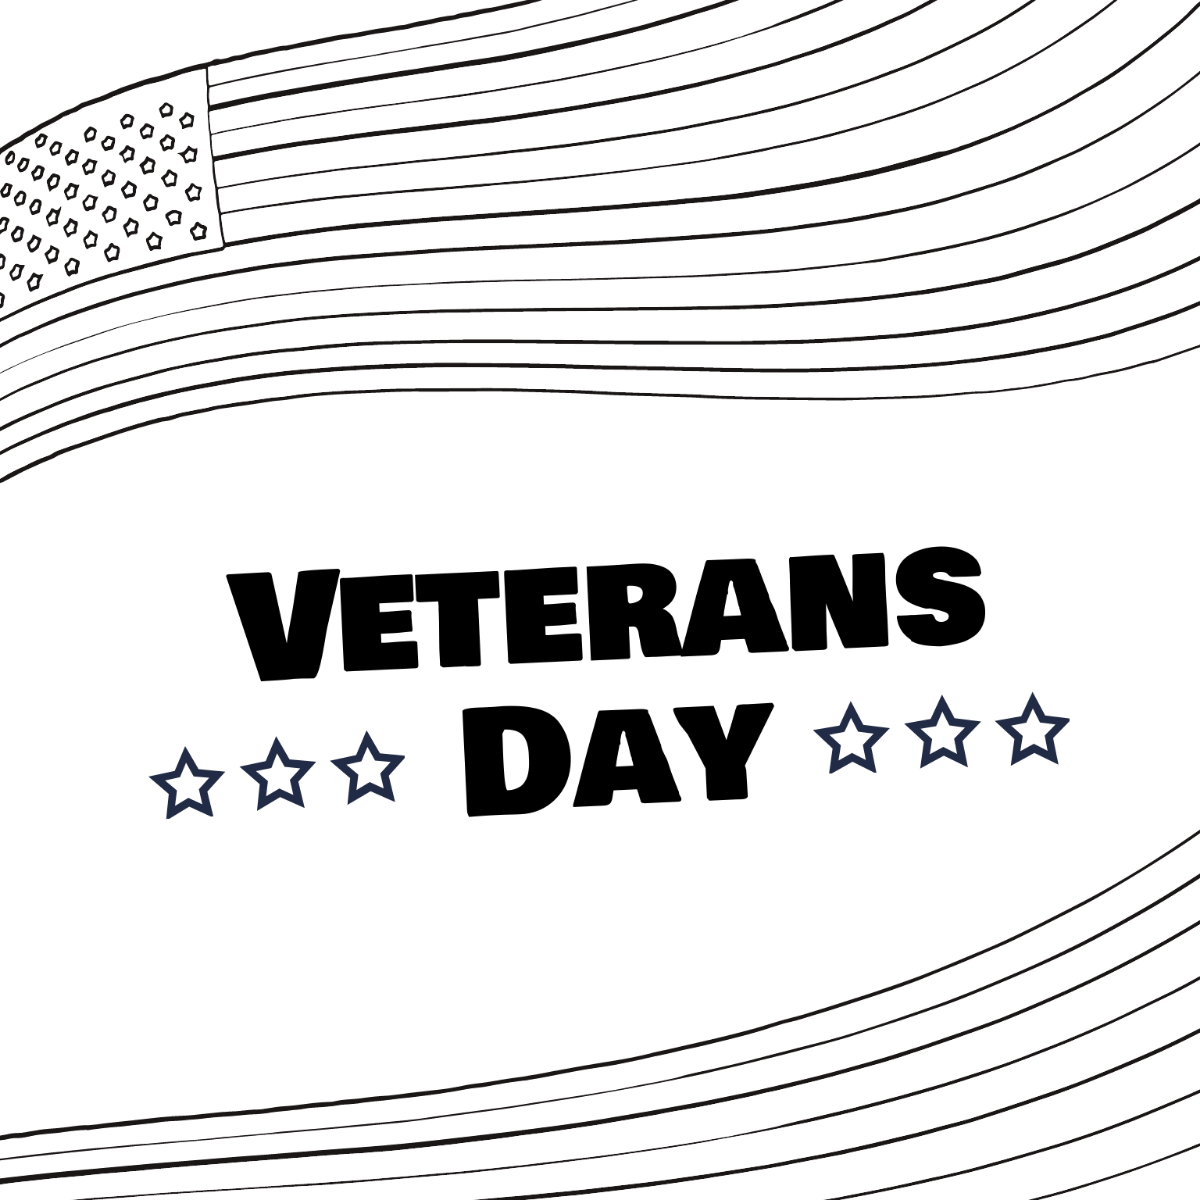 Veterans Day Image Drawing